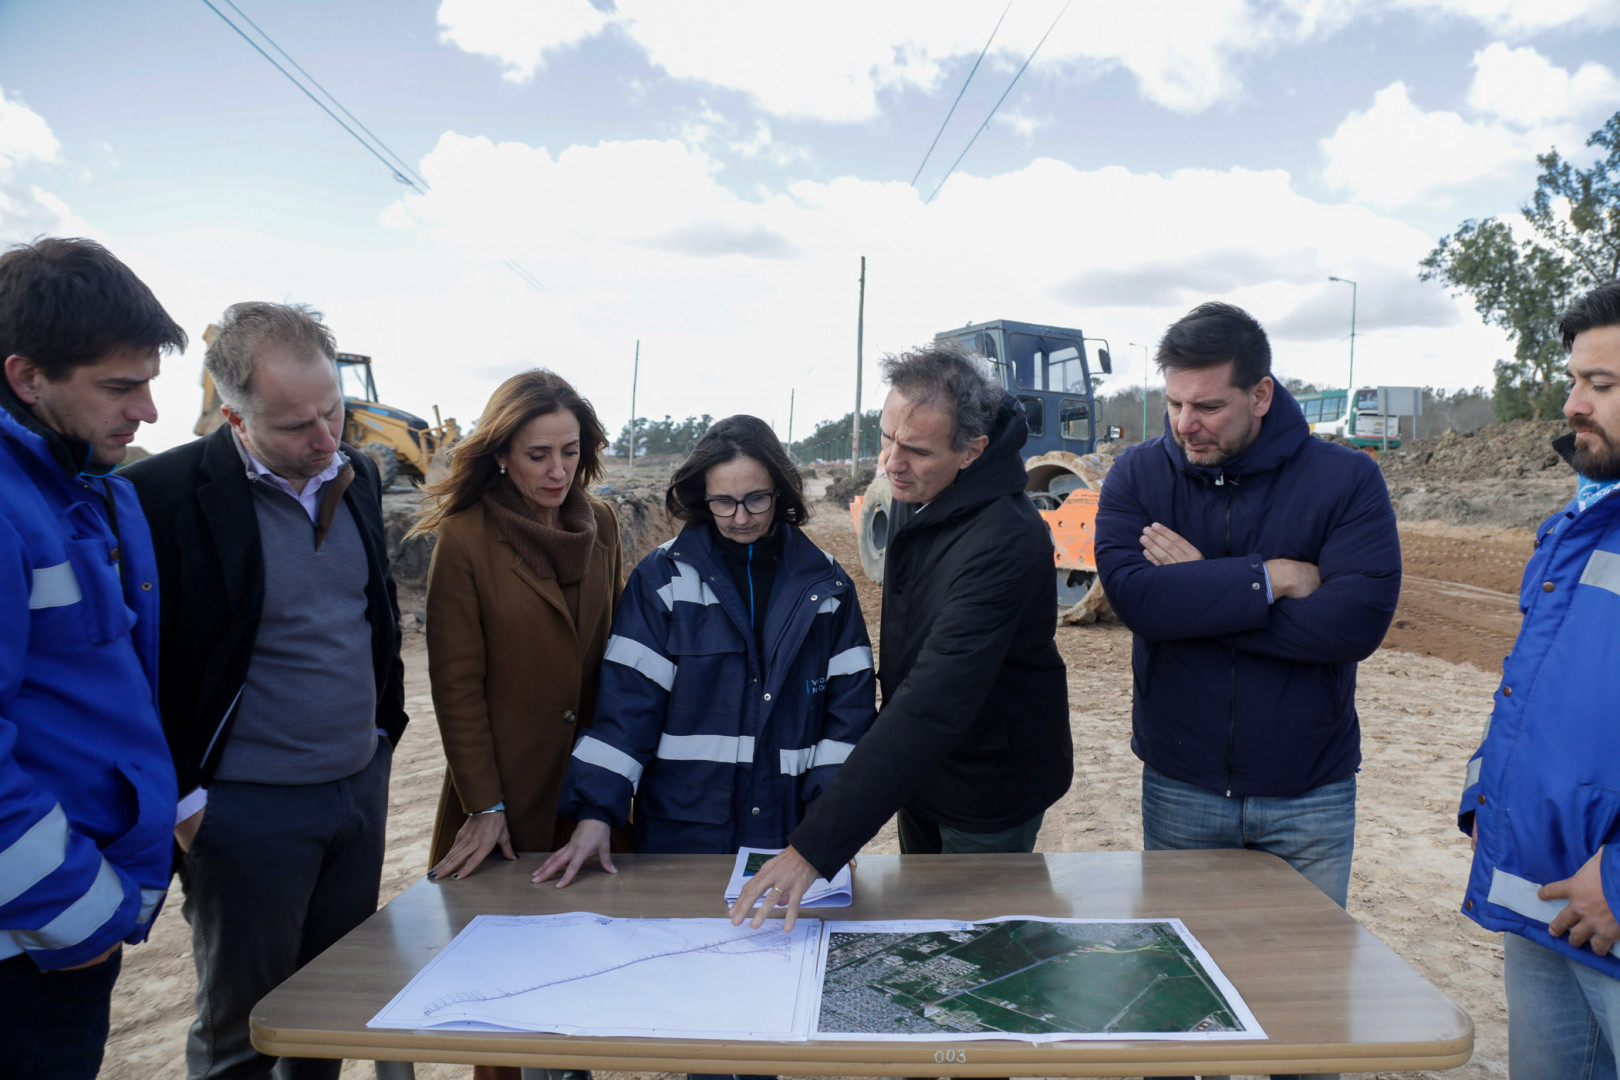 Katopodis and Tolosa Paz toured road works underway in the city of La Plata